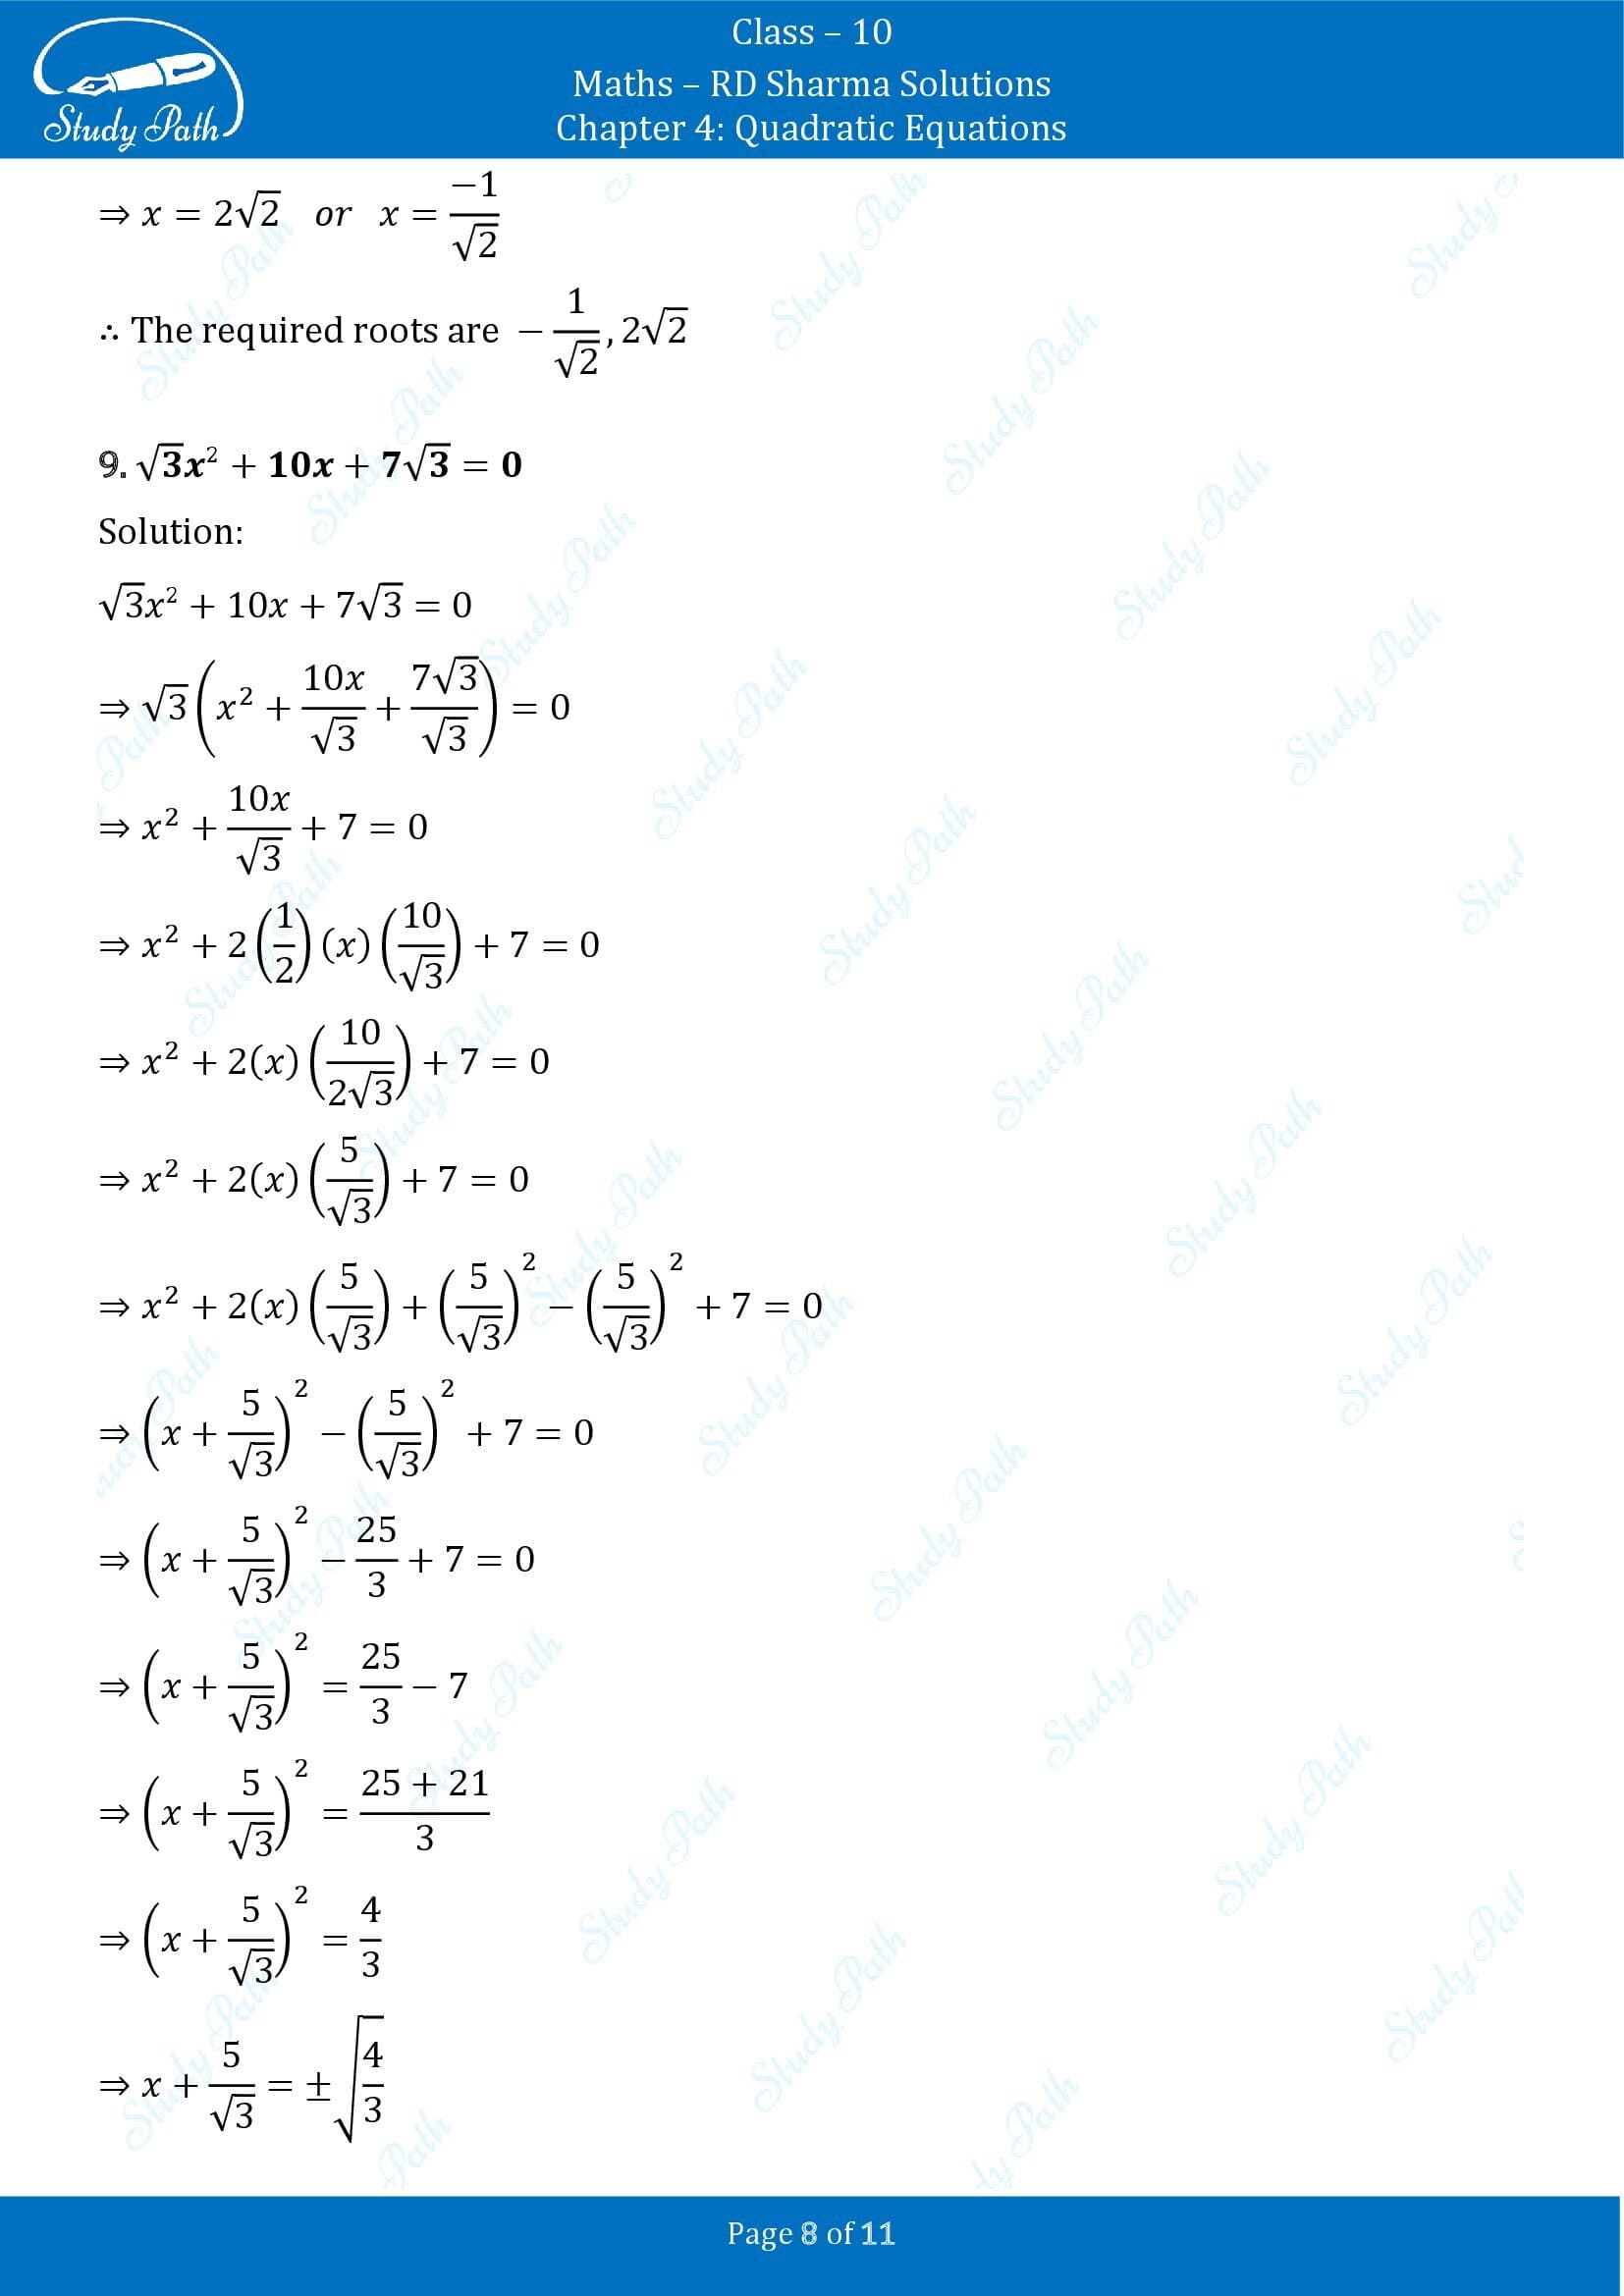 RD Sharma Solutions Class 10 Chapter 4 Quadratic Equations Exercise 4.4 00008